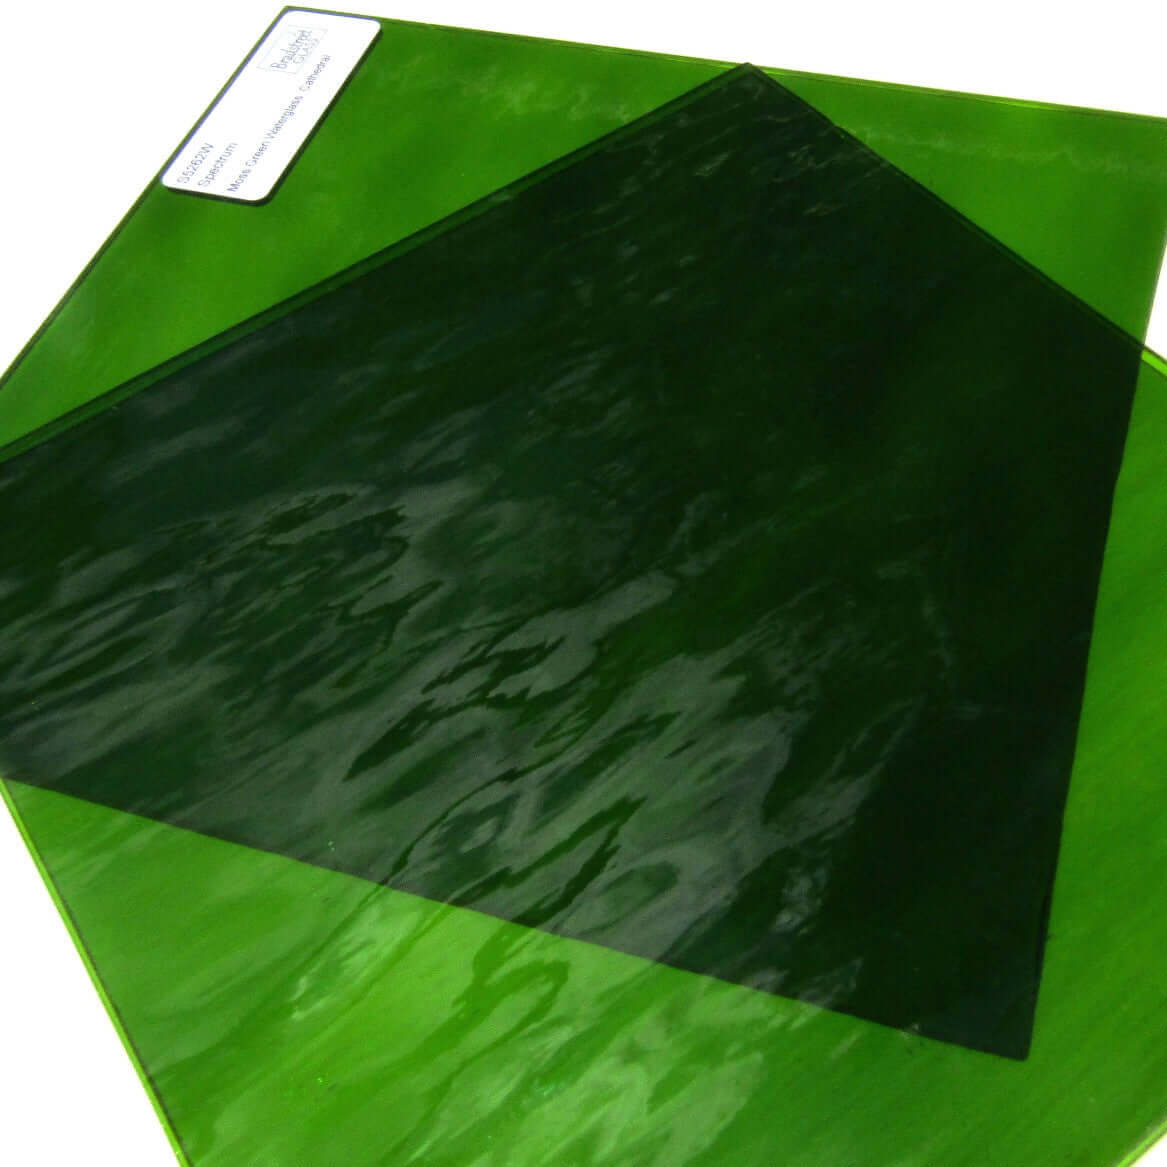 Spectrum Moss Green Waterglass Translucent Cathedral Stained Glass Sheet S5262W